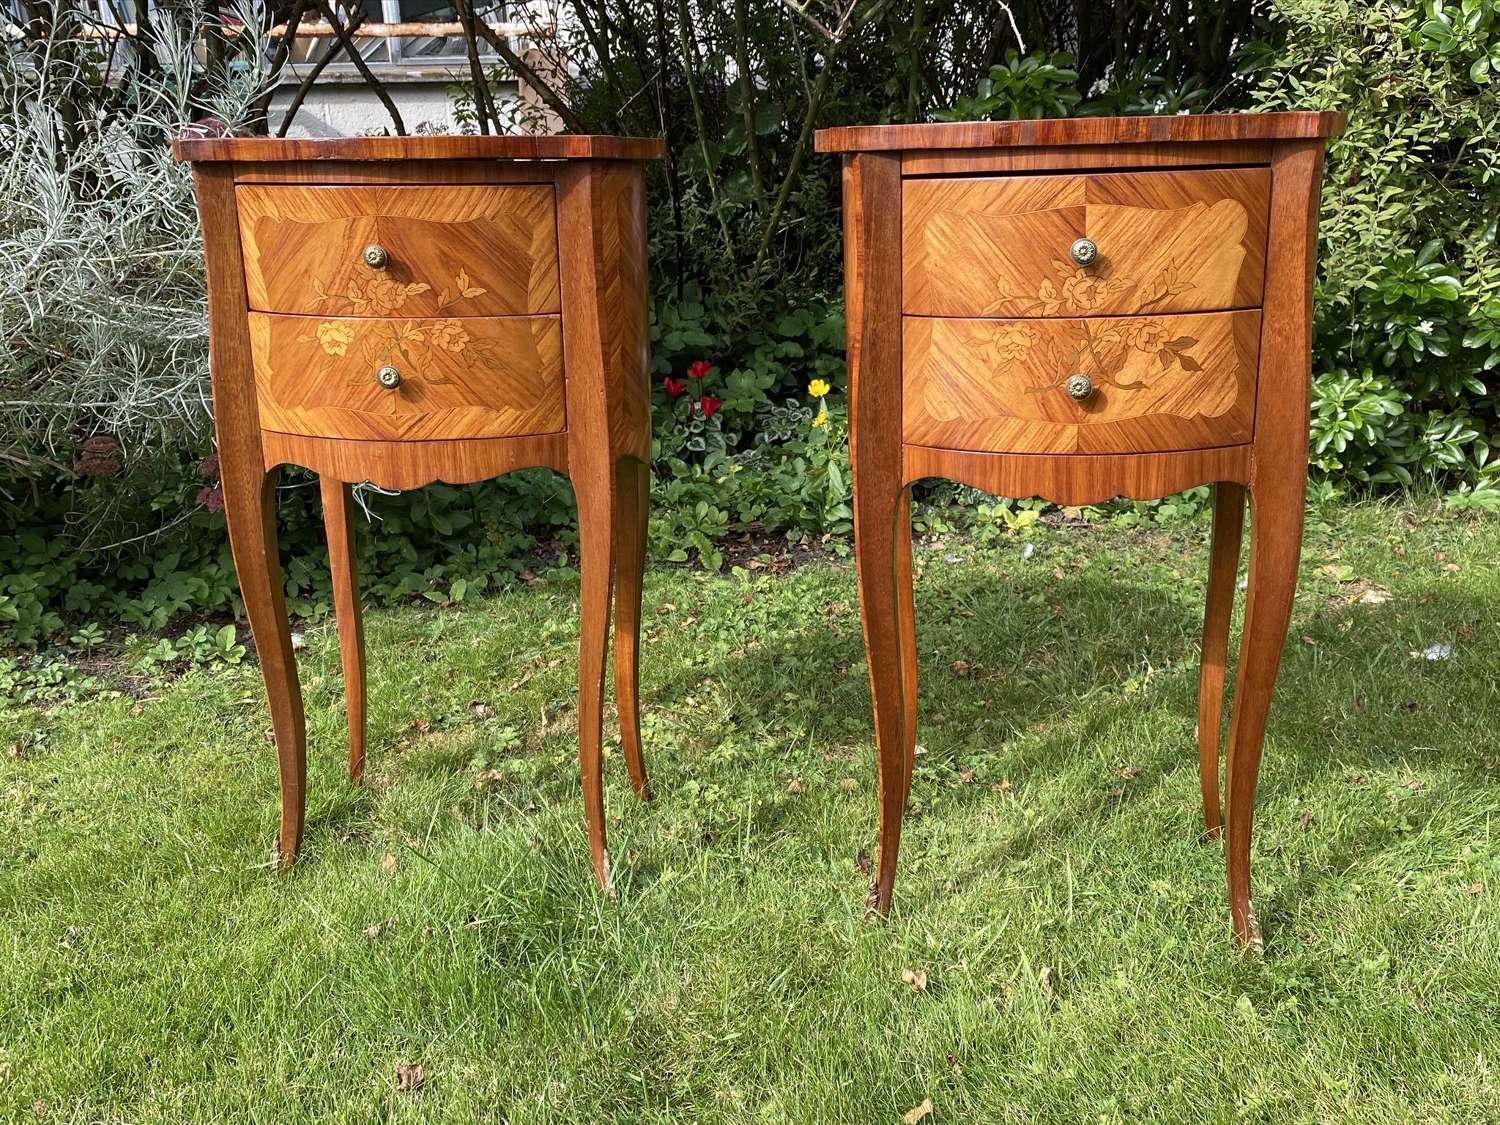 A pair of French marquetry bedside tables